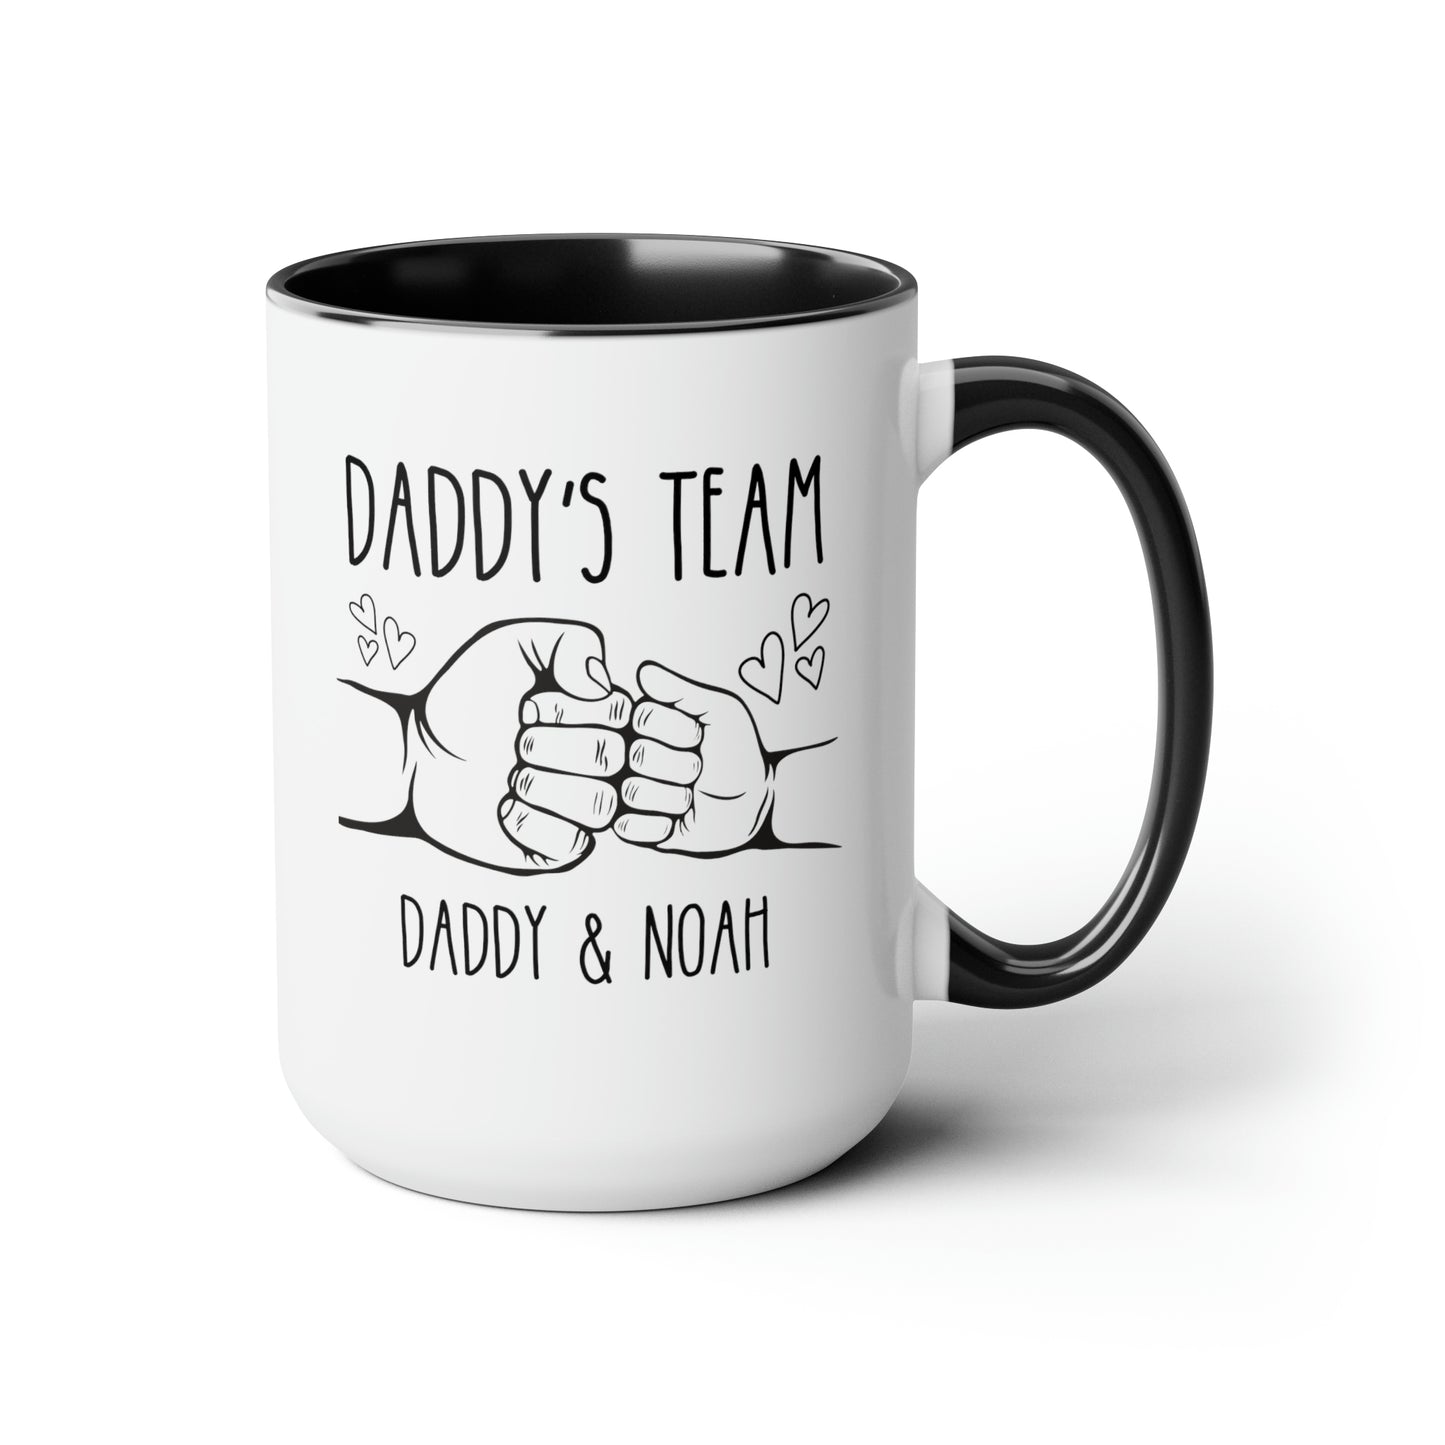 Daddy's Team 15oz white with black accent funny large coffee mug gift for dad father's day from kids name customize personalize grandfather fist bump hearts waveywares wavey wares wavywares wavy wares